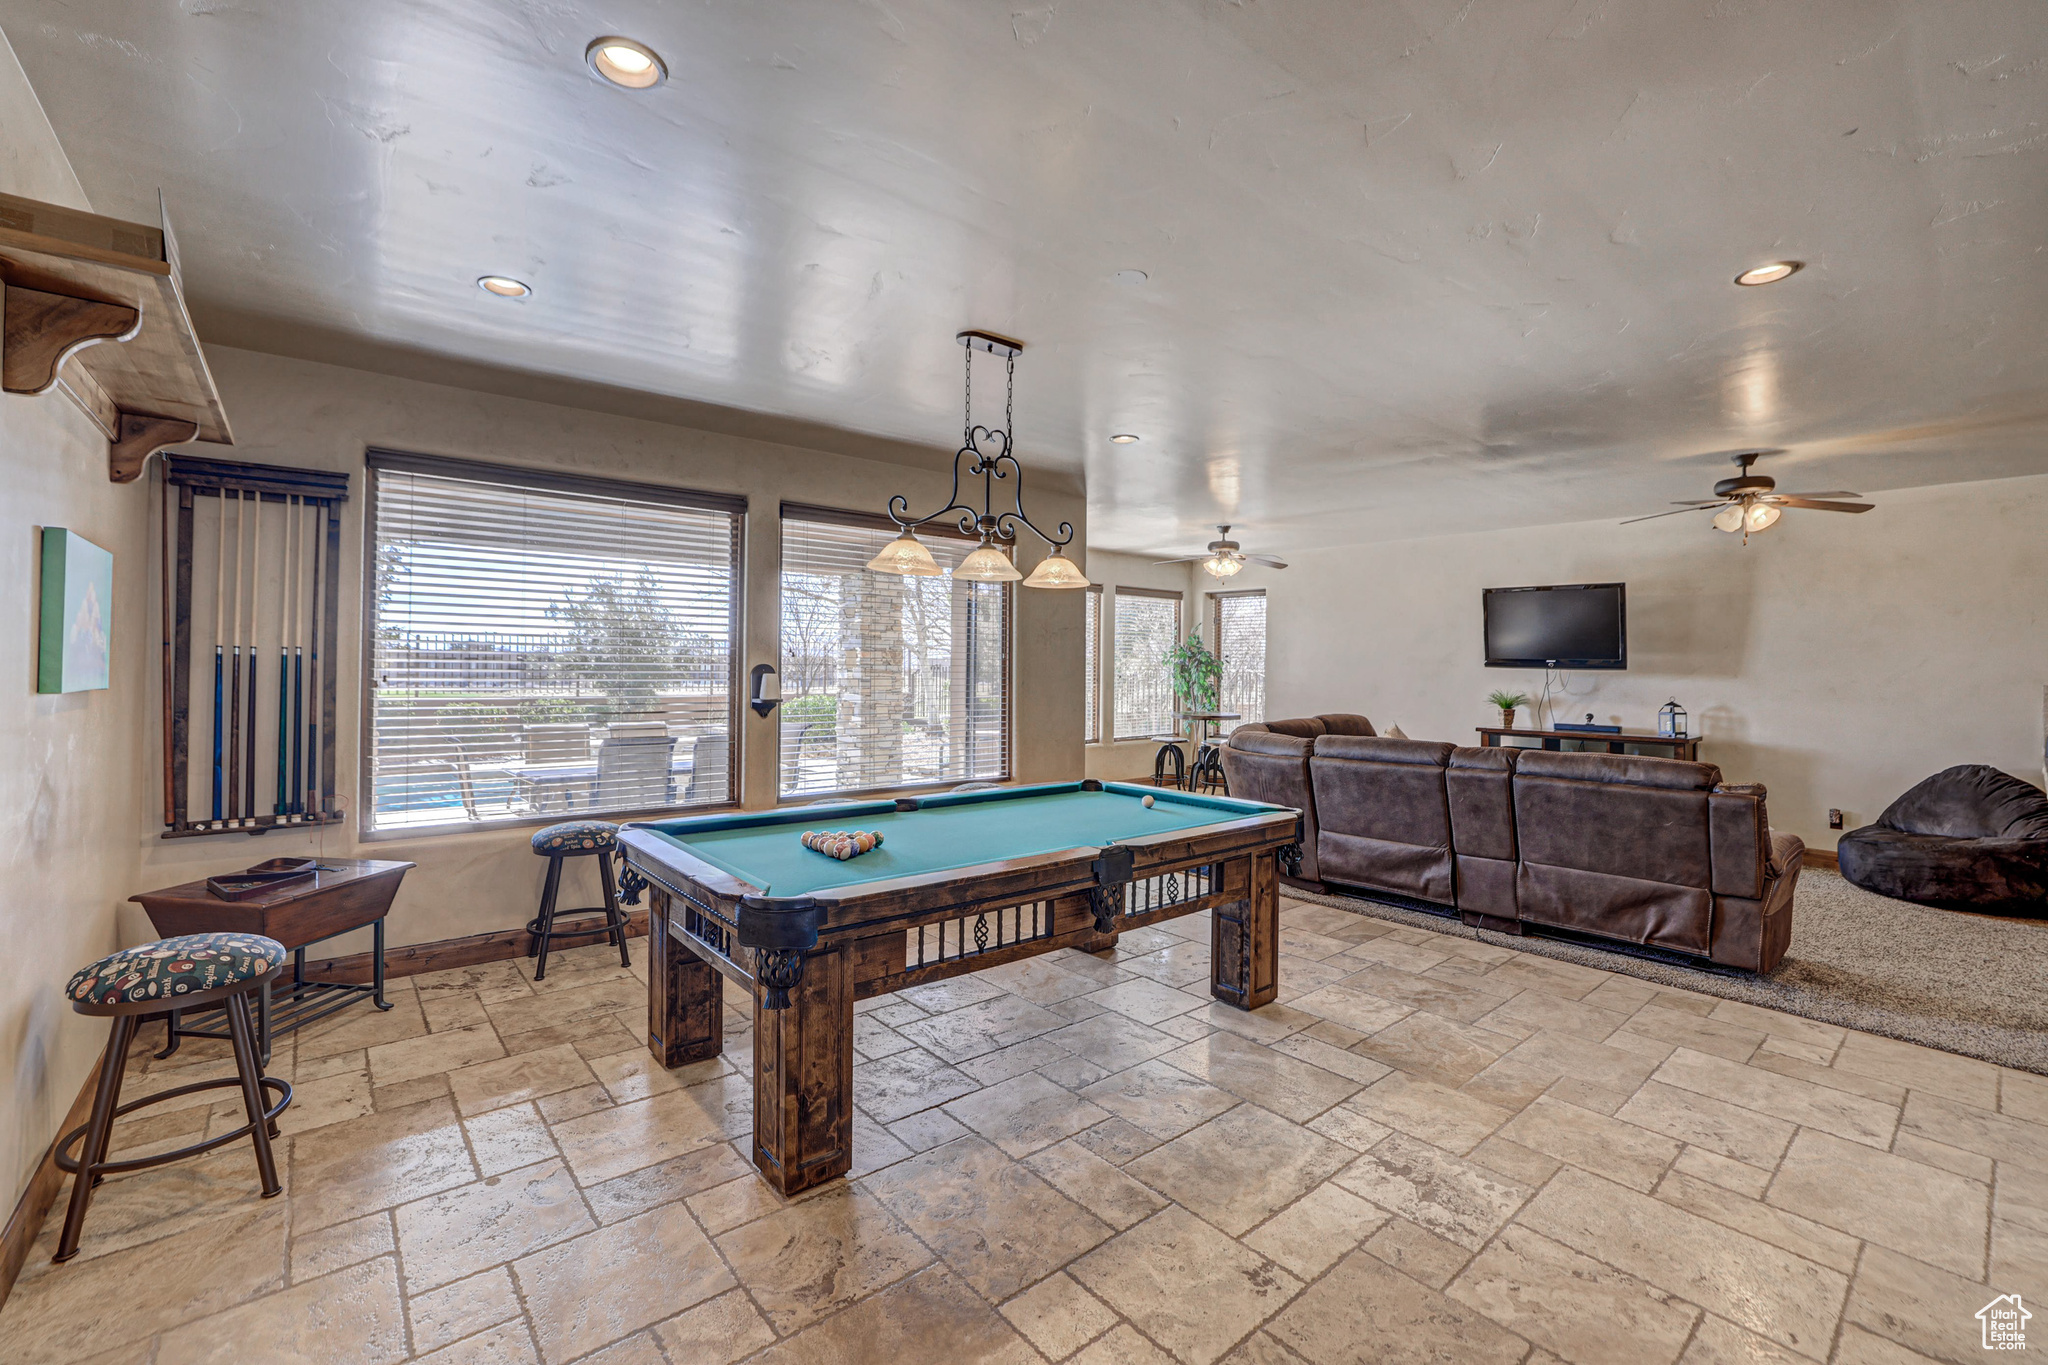 Playroom featuring pool table, ceiling fan, and light tile floors